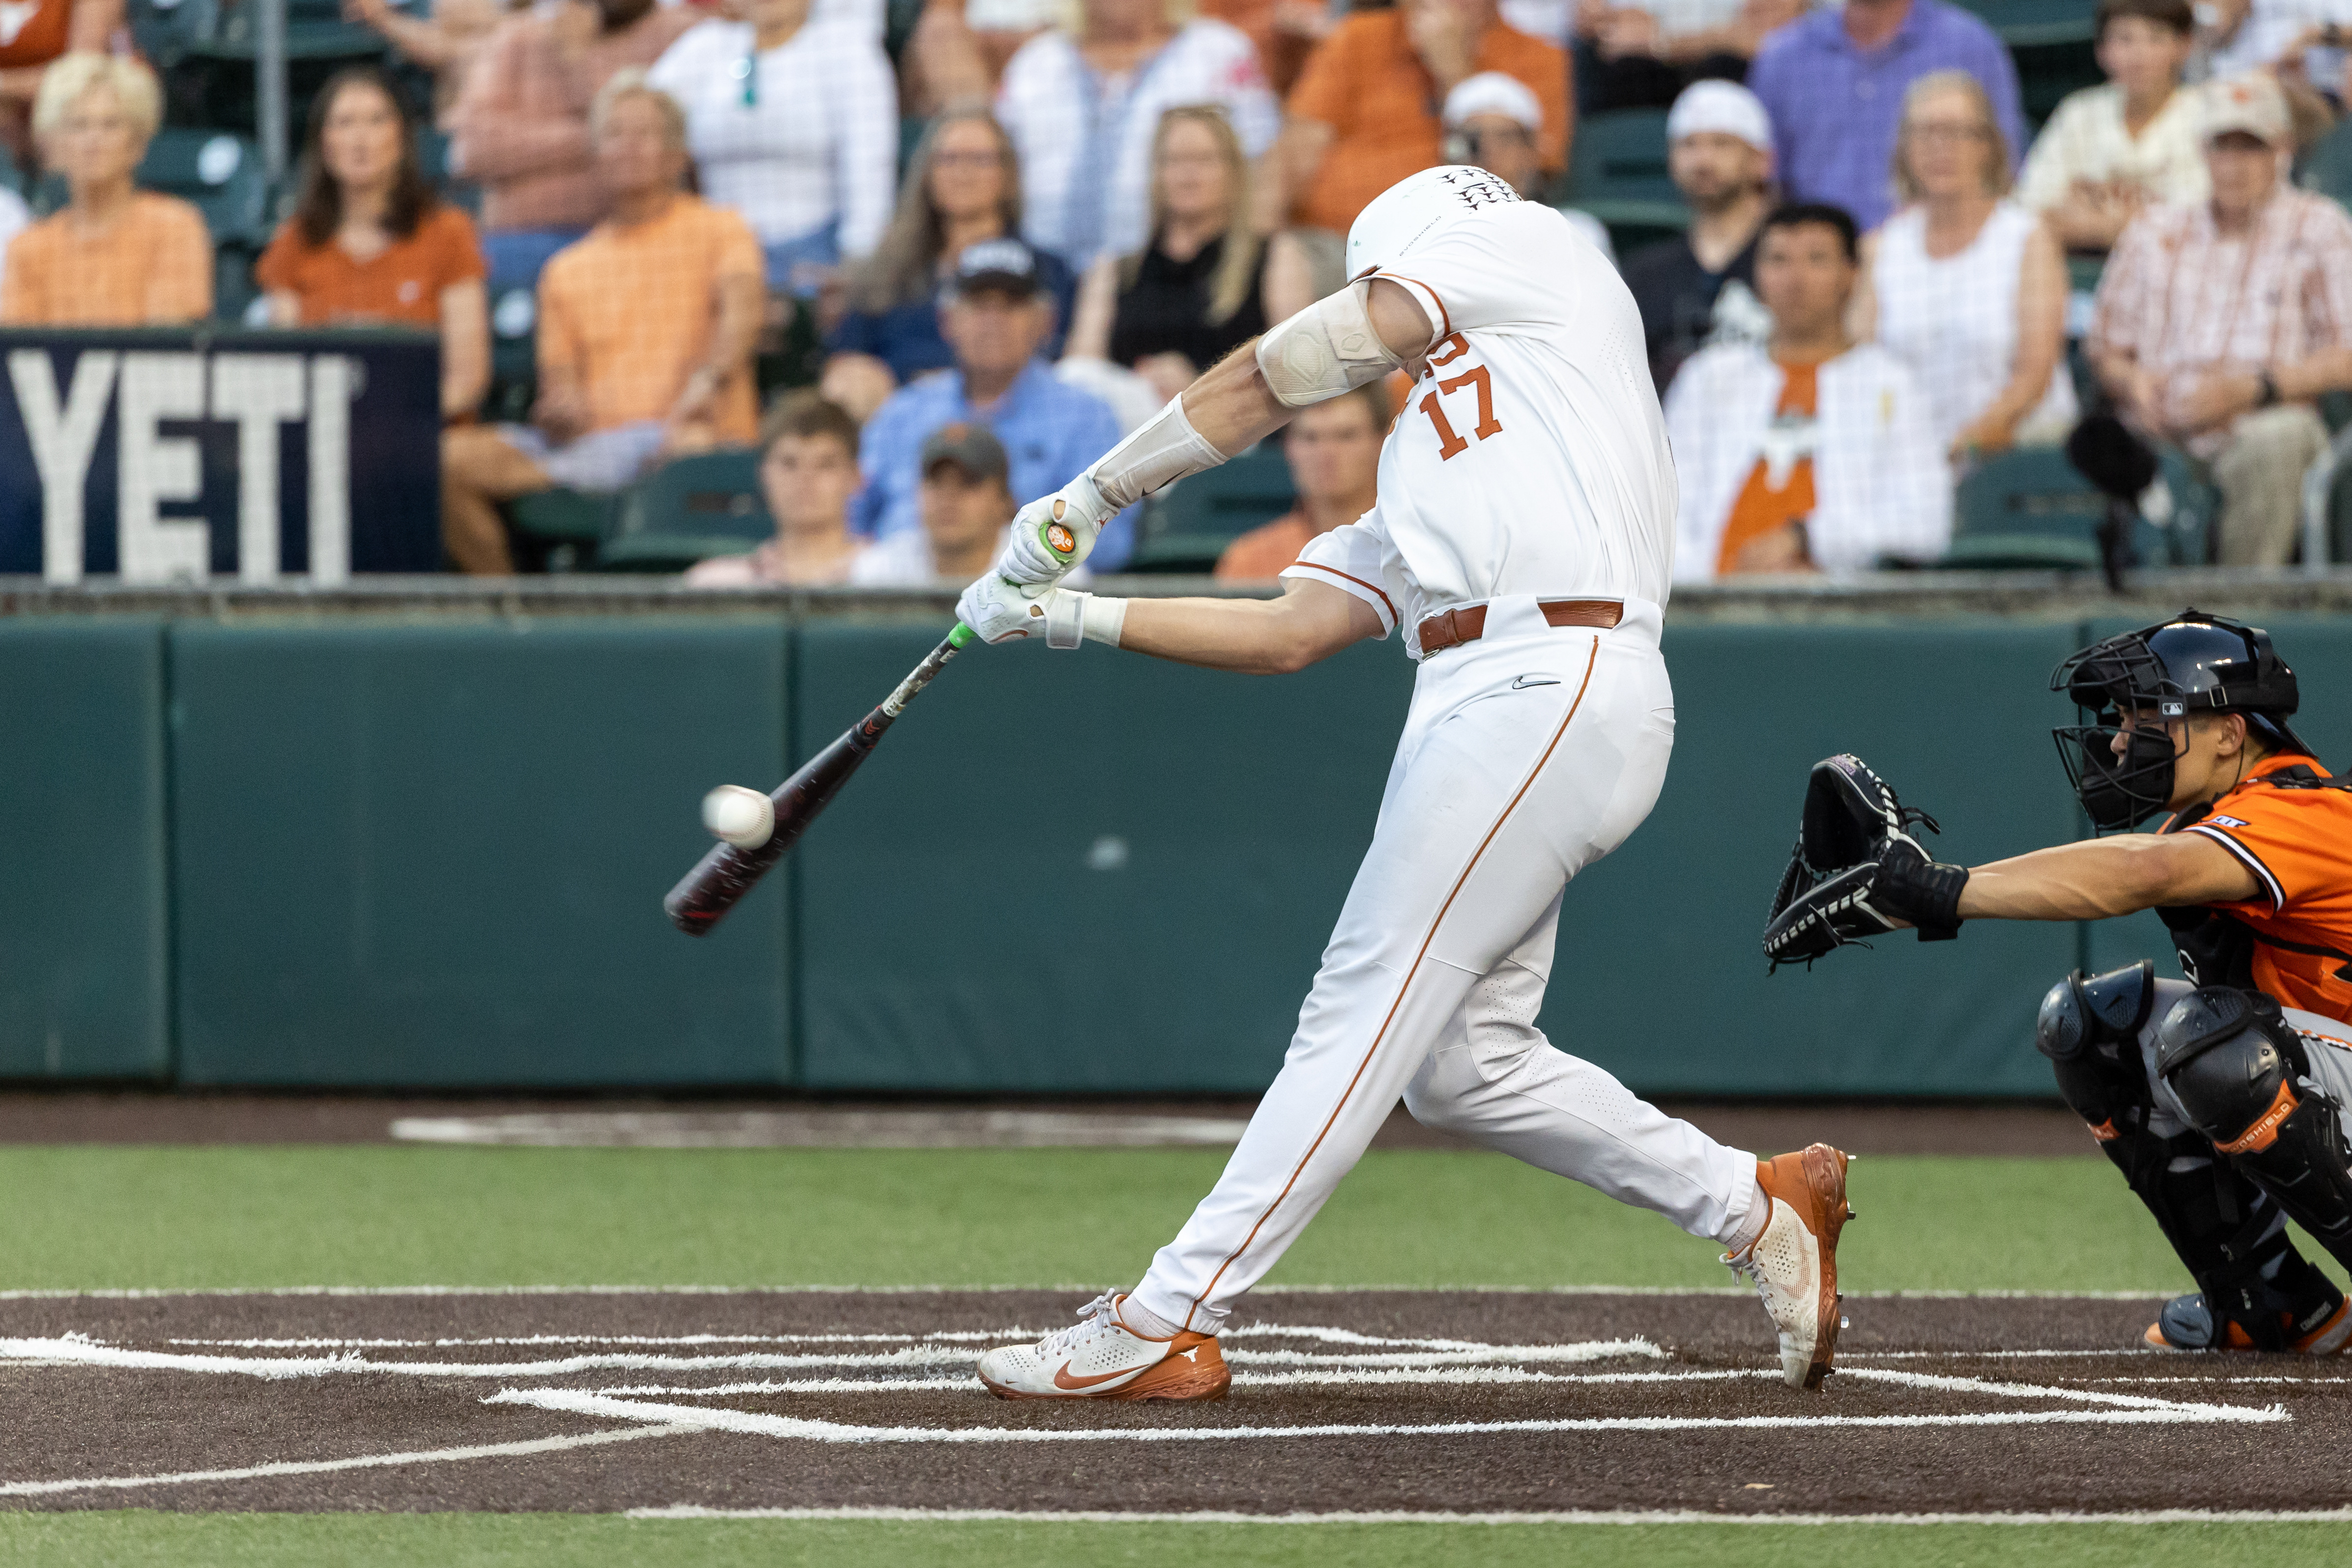 Texas Longhorns infielder Ivan Melendez (17) hits the ball during the game between Texas Longhorns and Oklahoma State Cowboys on April 29, 2022, at UFCU Disch-Falk Field in Austin, TX.